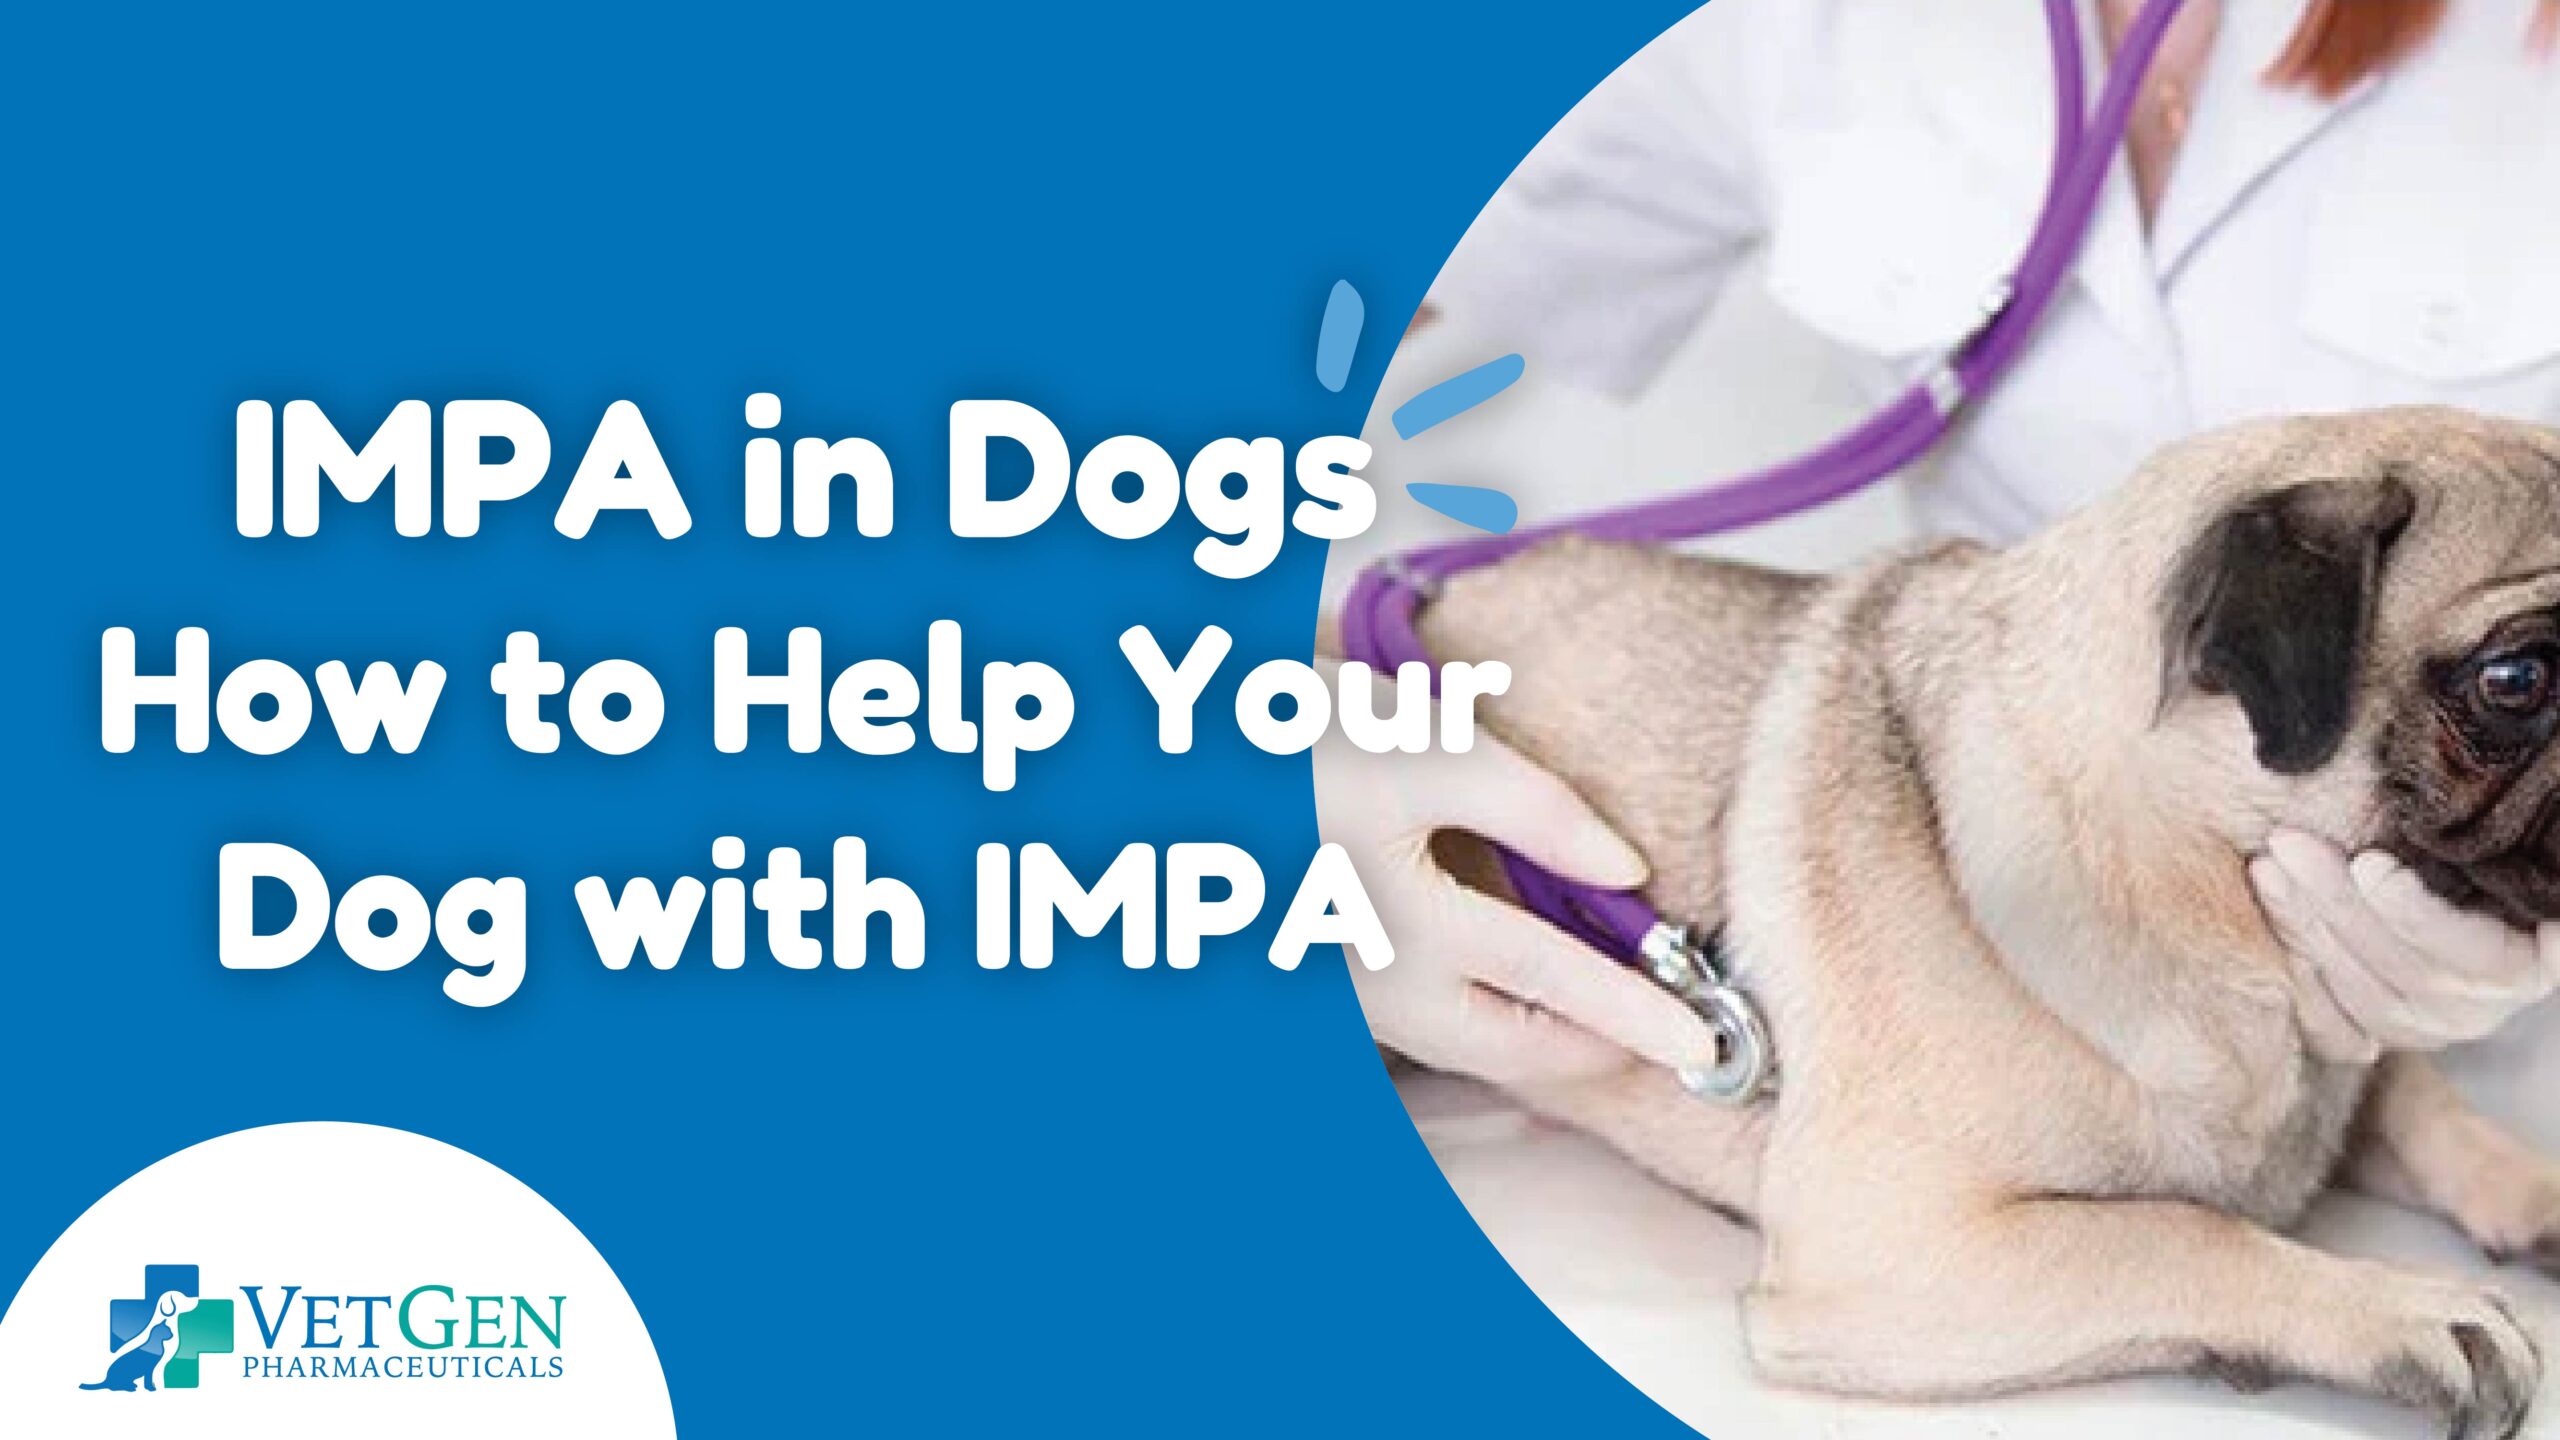 IMPA in Dogs How to Help Your Dog with IMPA